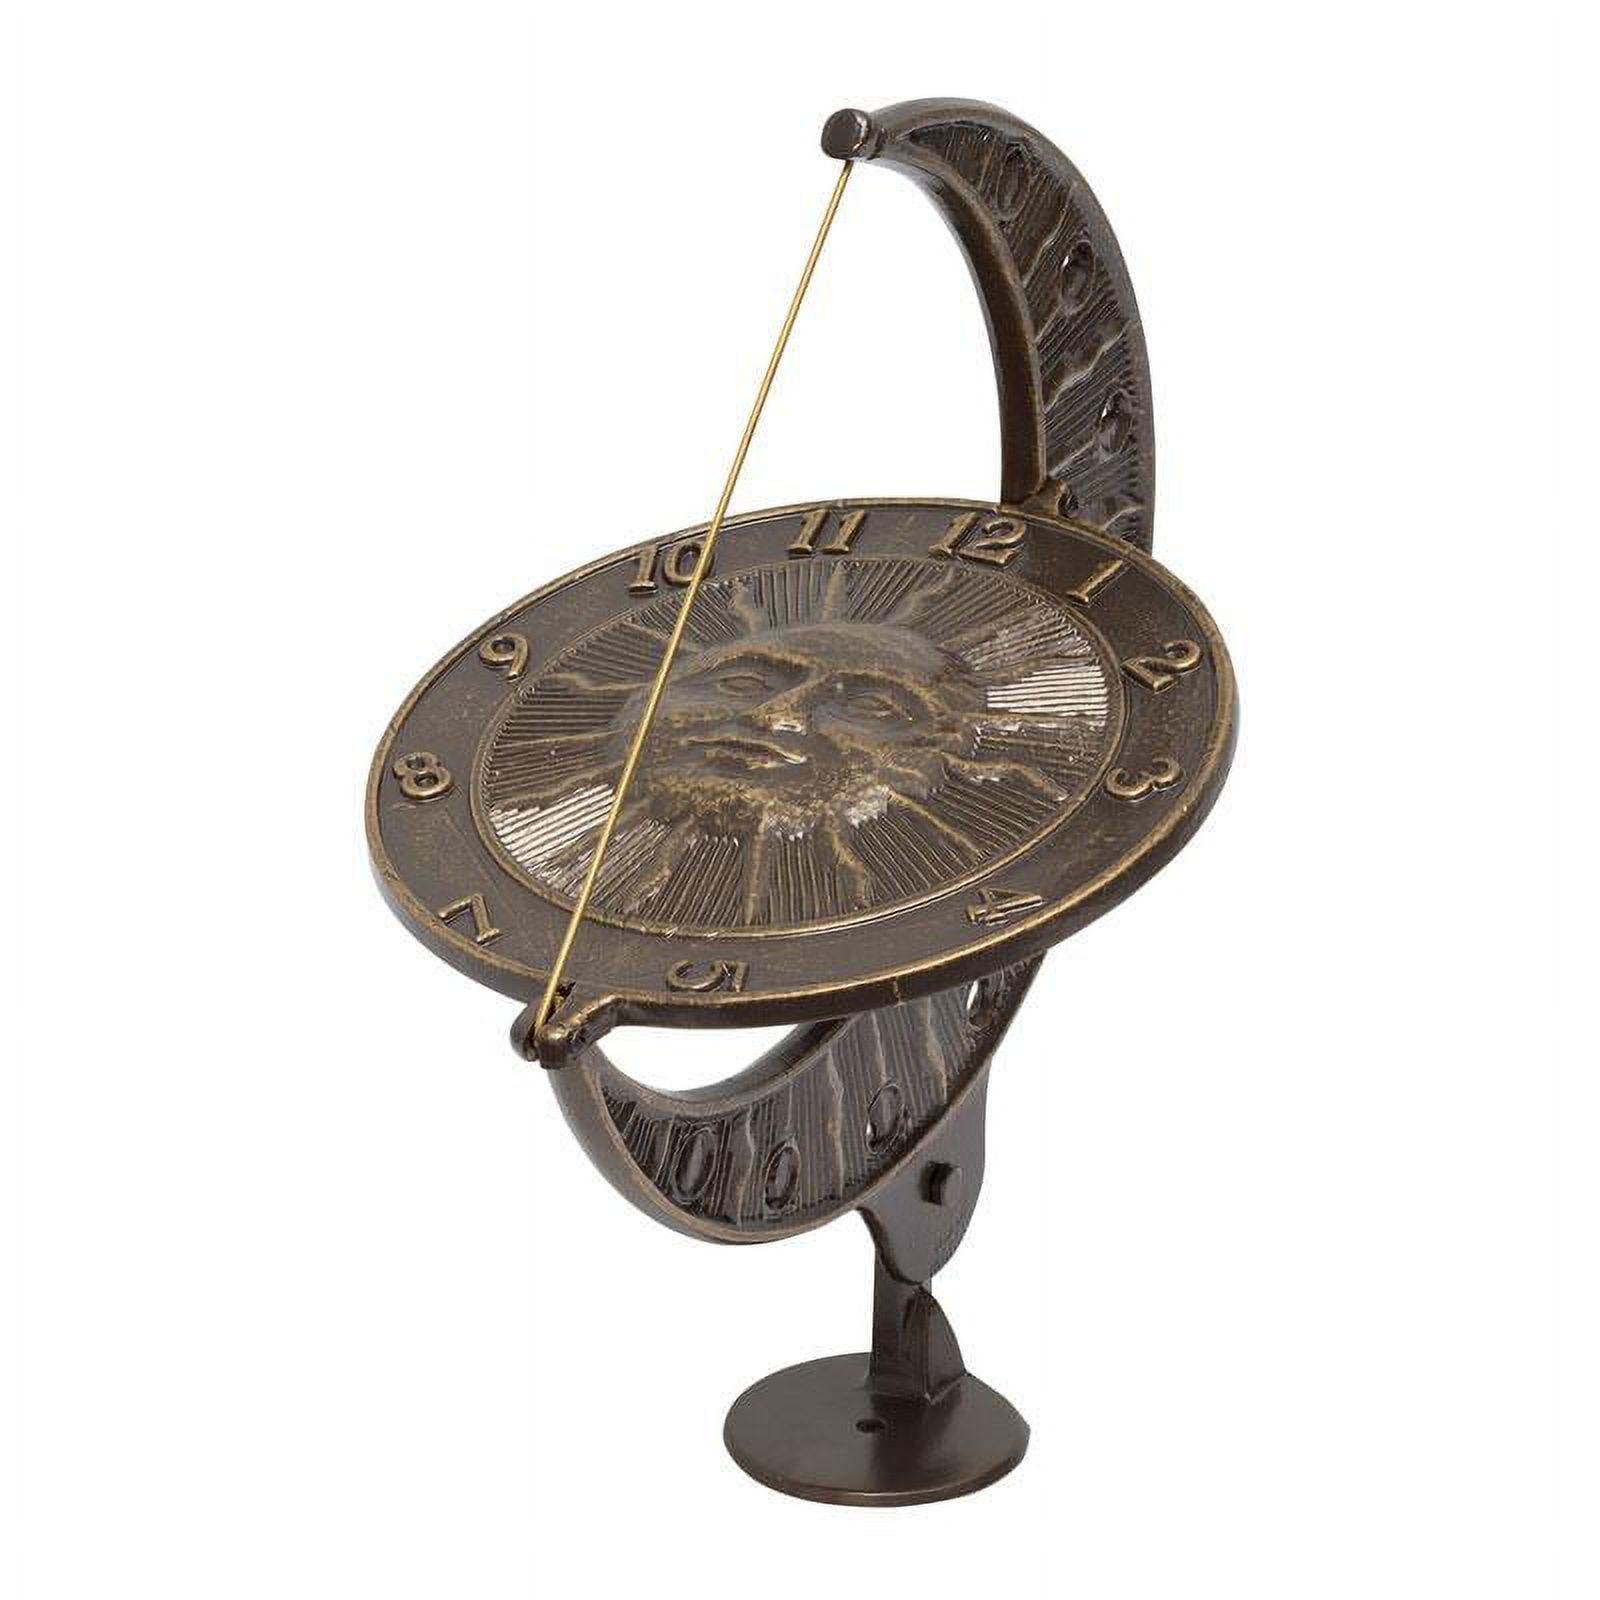 Whitehall Aluminum Sun and Moon Sundial, French Bronze, 12"L - image 1 of 4